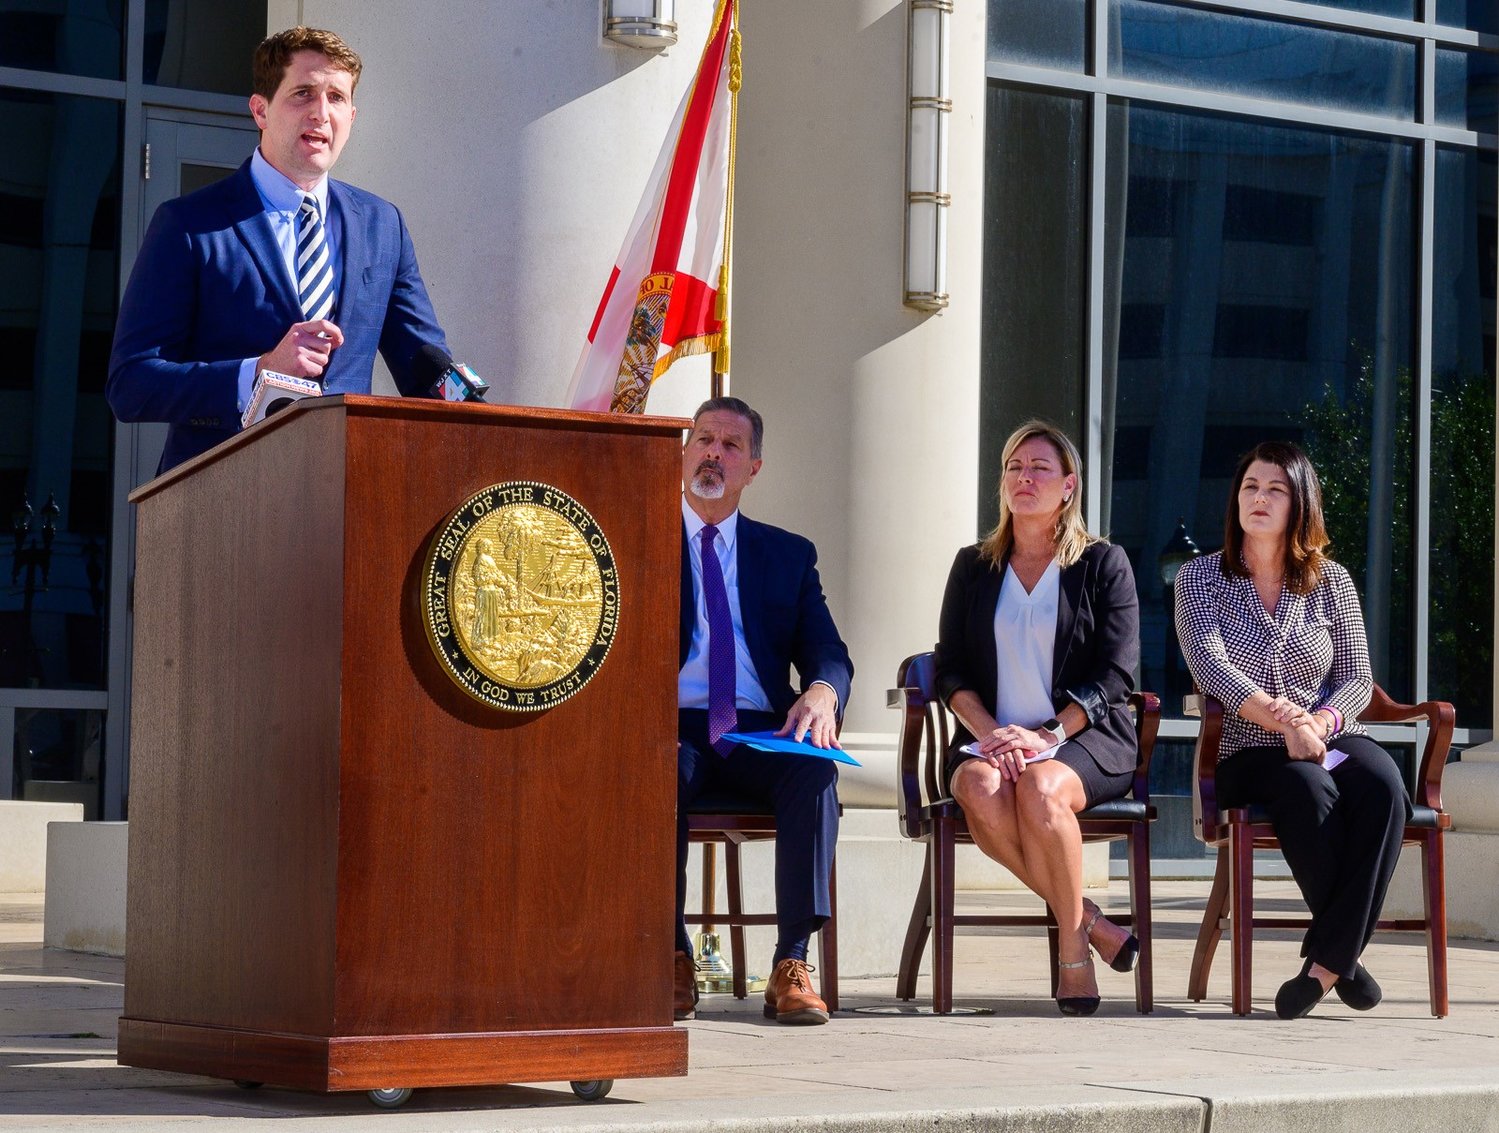 St. Johns County Clerk Brandon J. Patty speaks Monday, Oct. 24, at a press conference announcing a service to fight property and mortgage fraud.